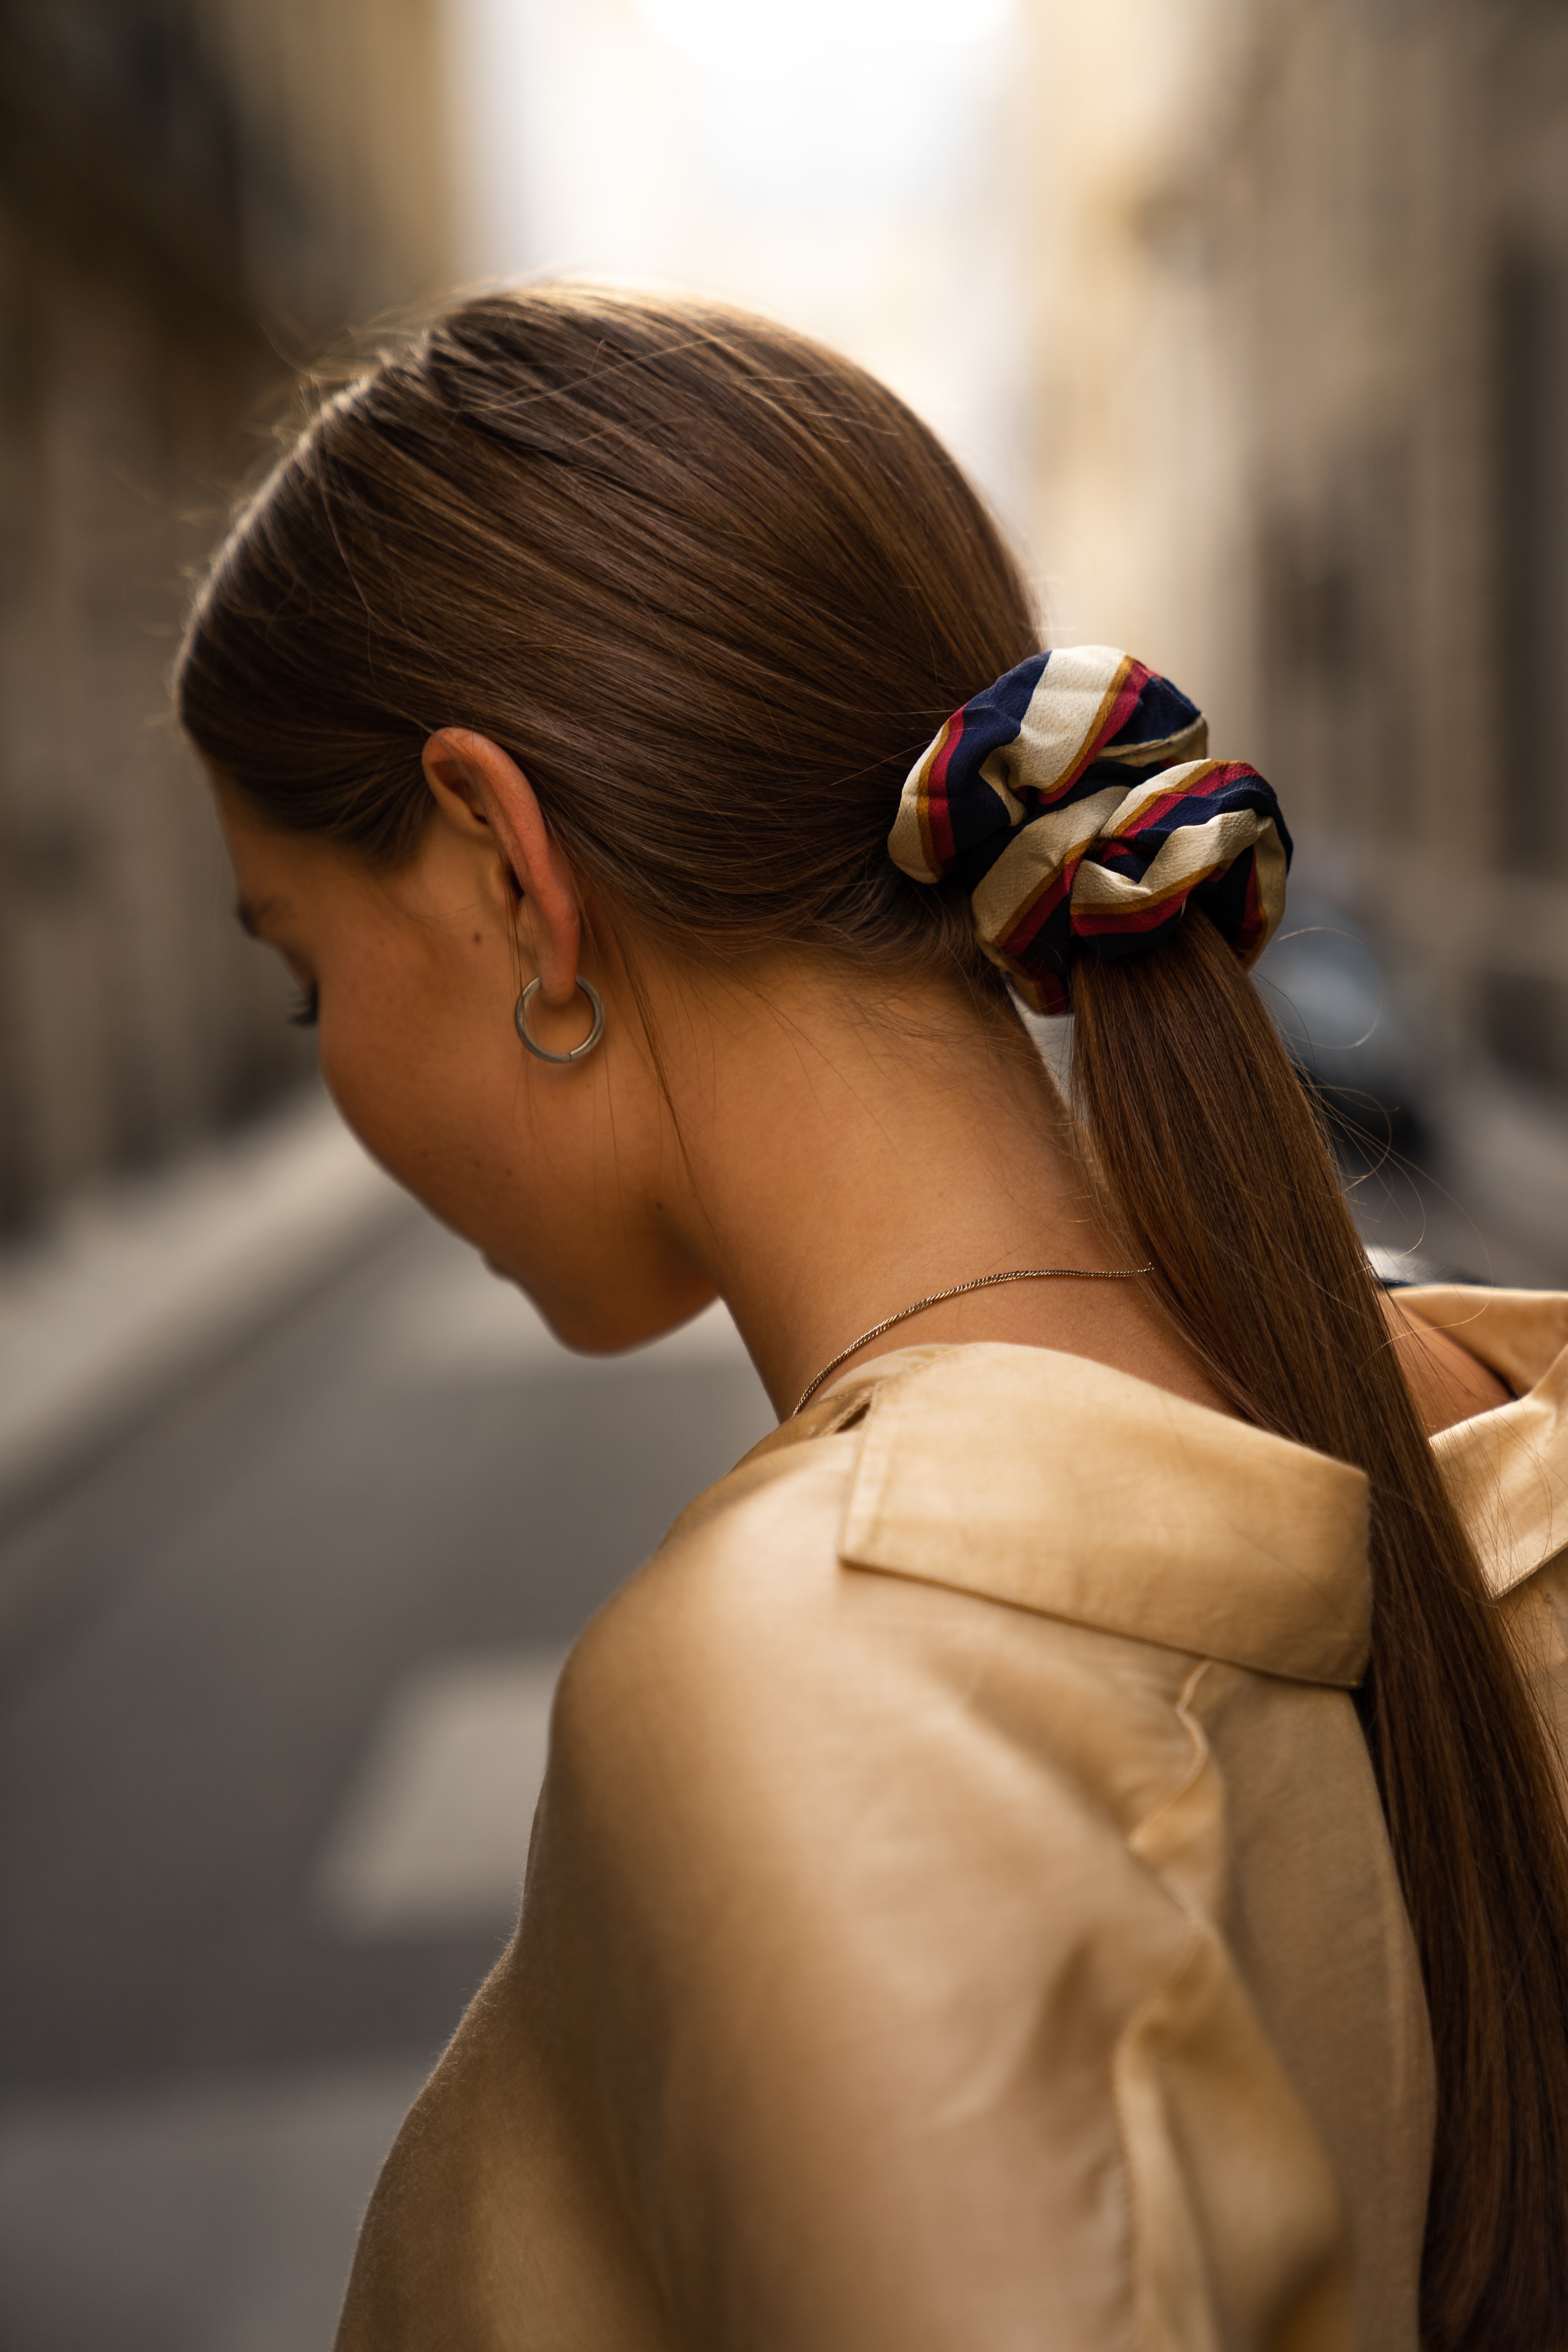 Girl with a long straight ponytail looks down with a striped scrunchie in her hair